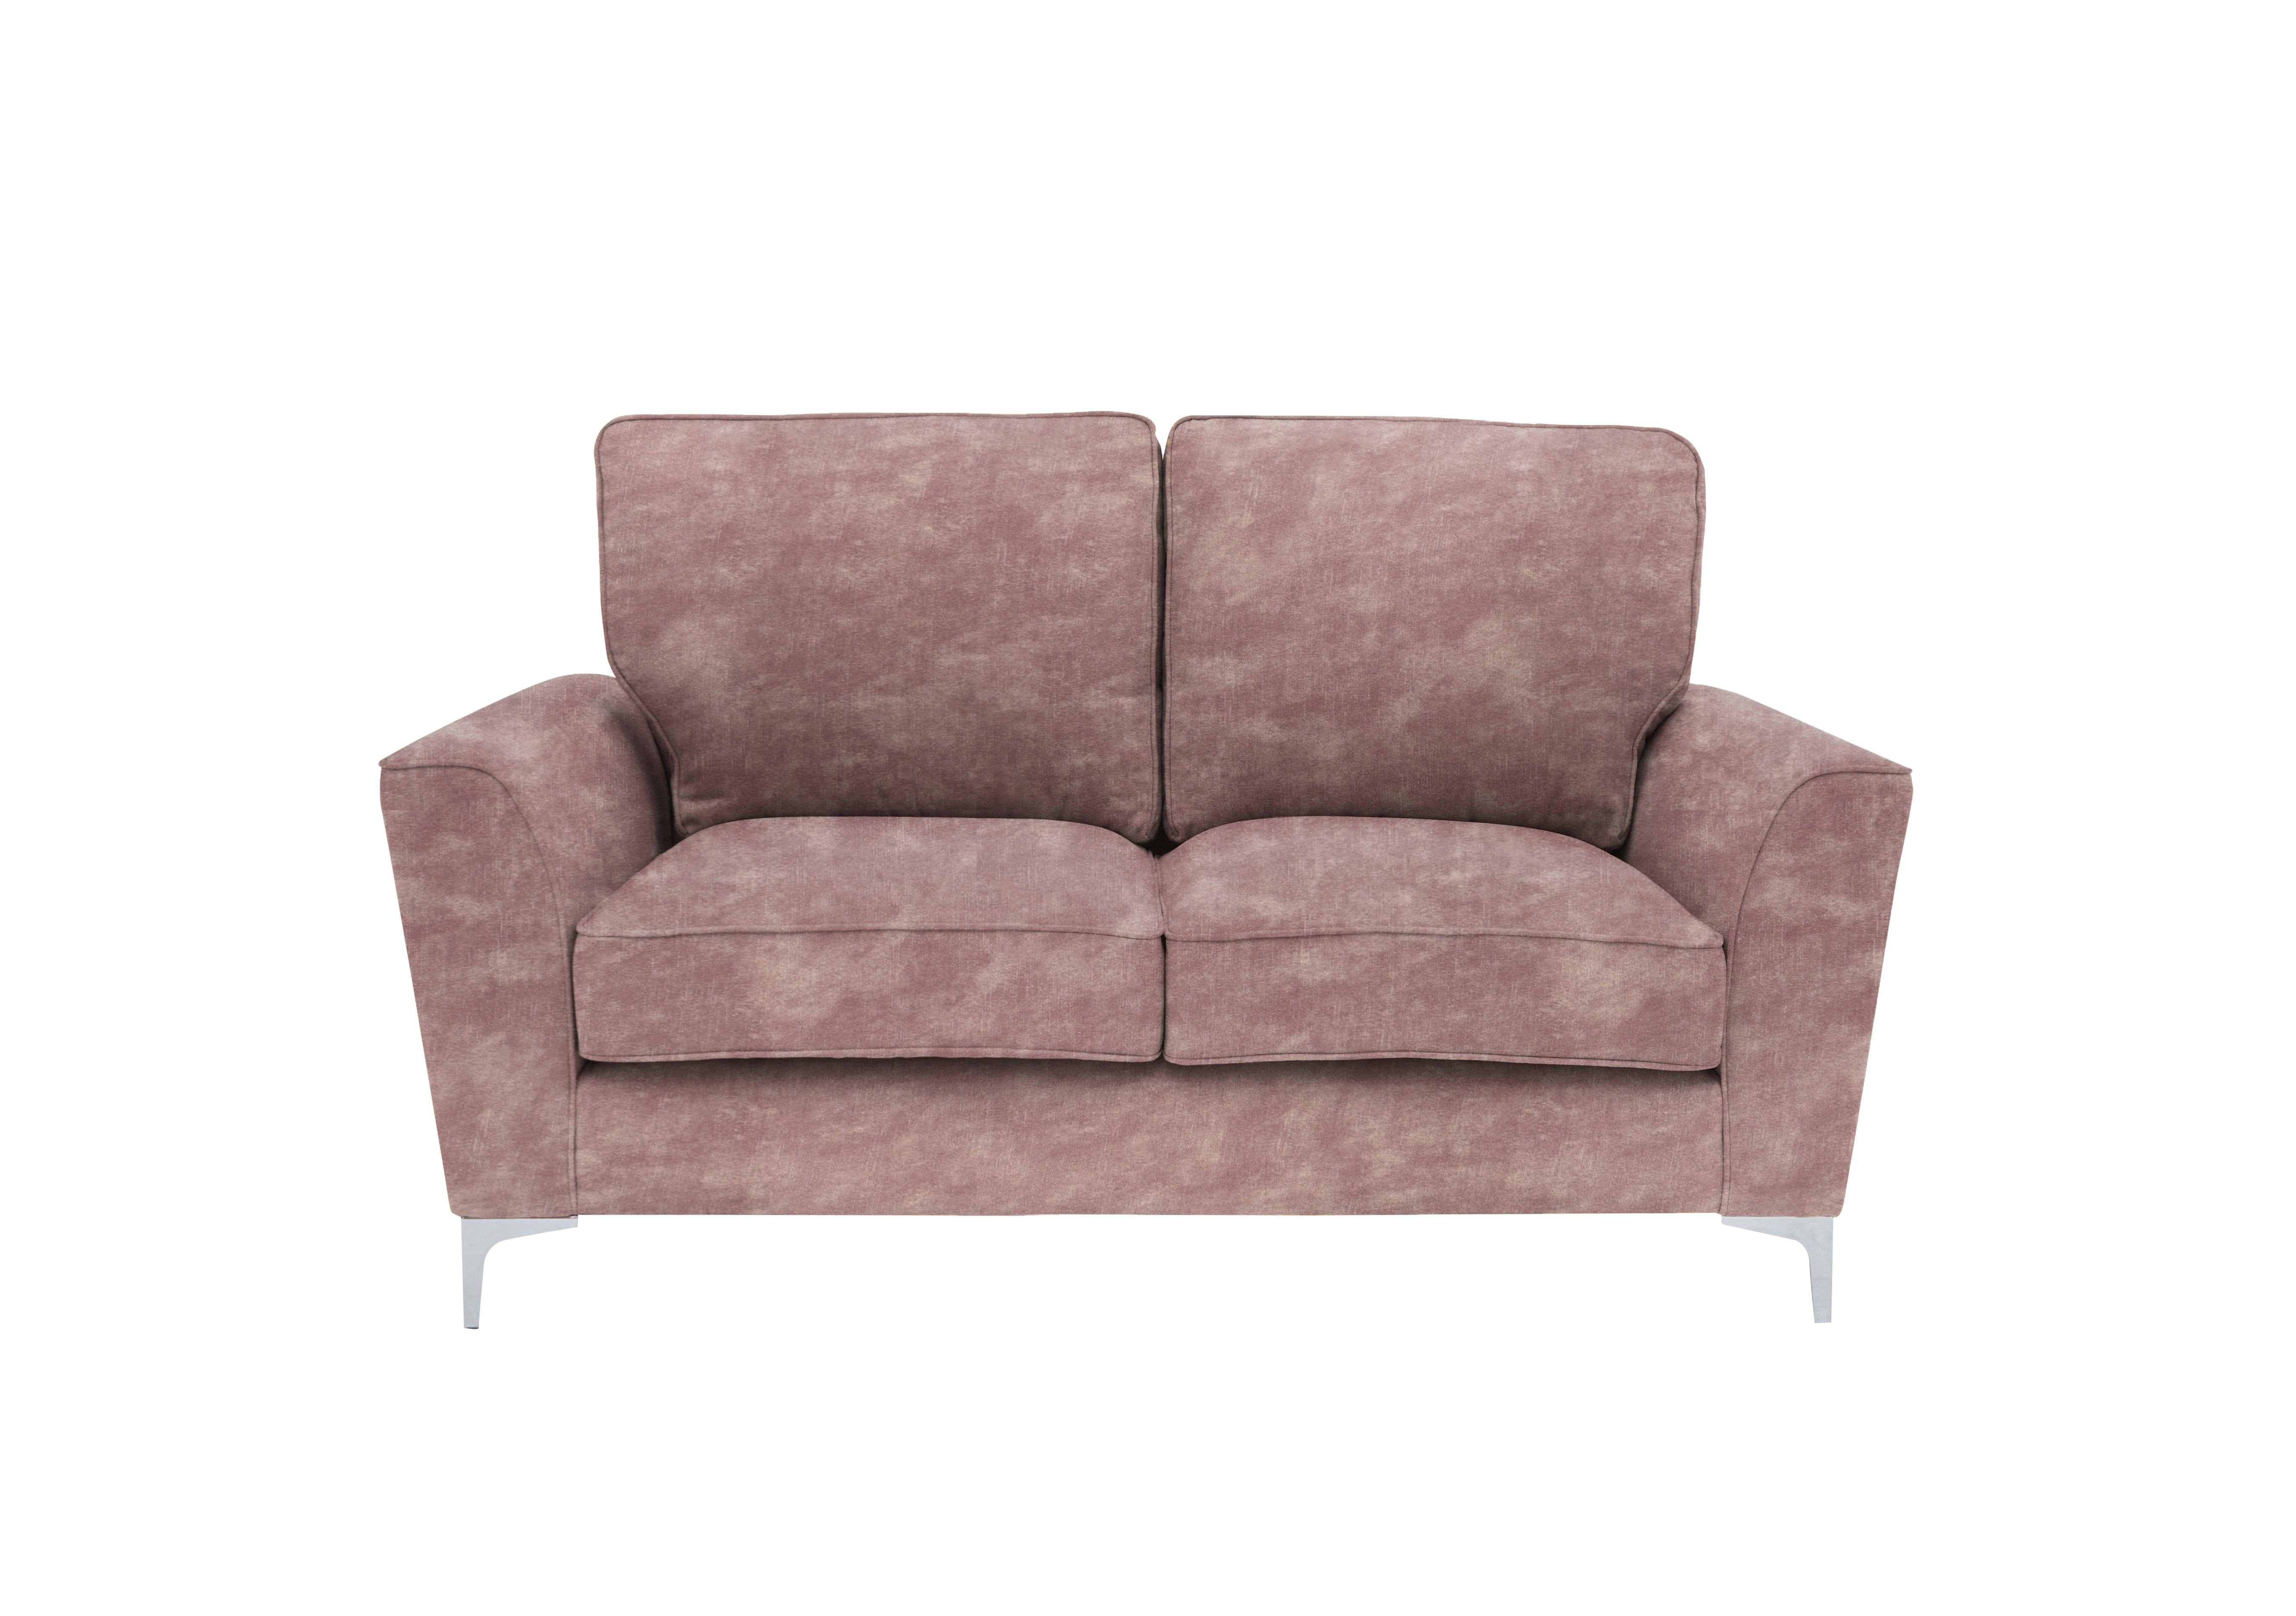 Legend 2 Seater Classic Back Fabric Sofa in Sublime Dusk on Furniture Village